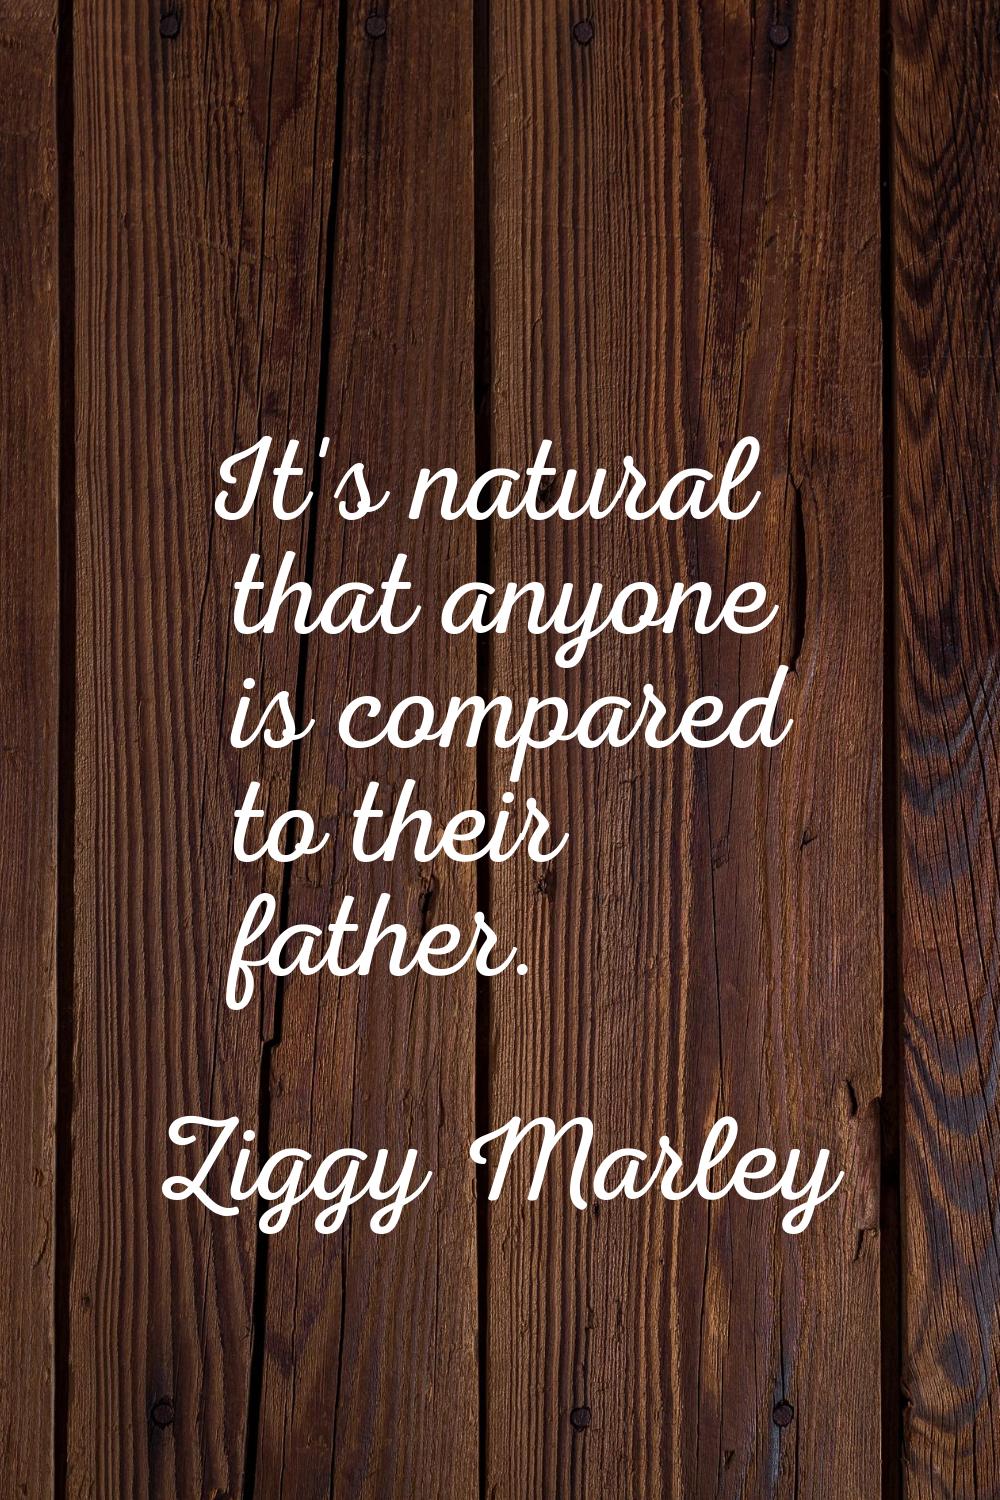 It's natural that anyone is compared to their father.